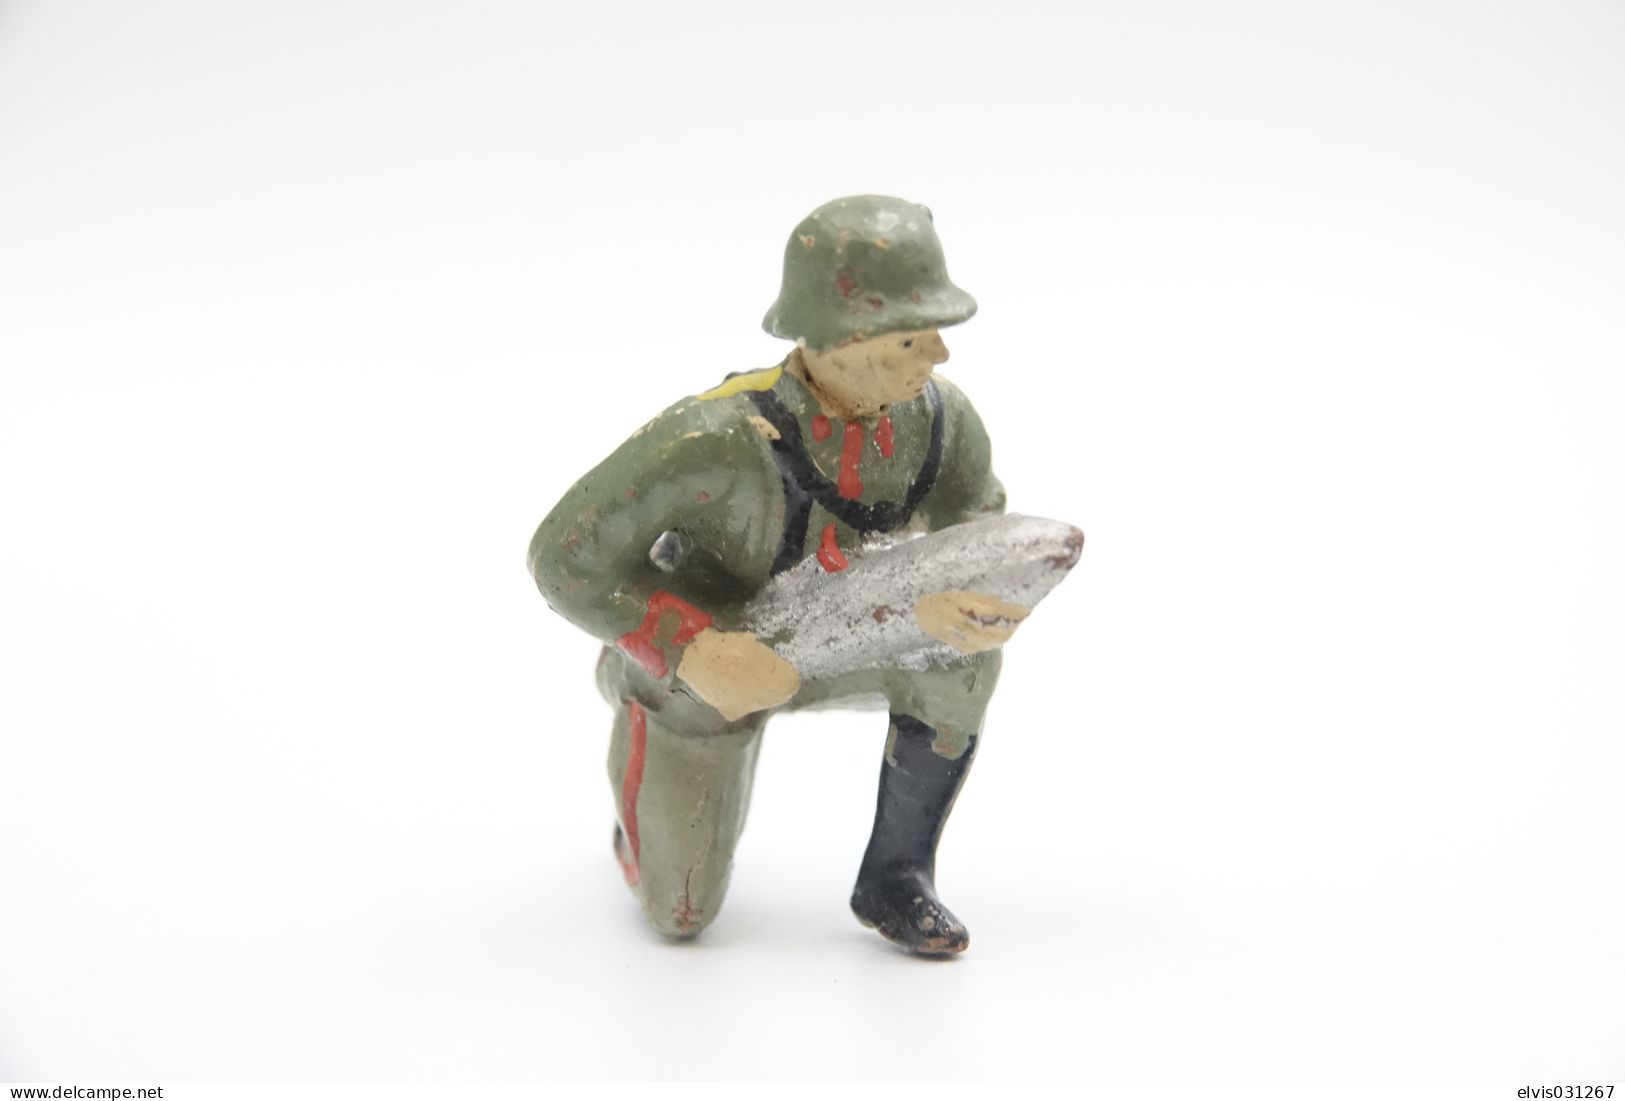 Lineol ? Germany, German With Shell, Vintage Toy Soldier, Prewar - 1930's, Elastolin, Lineol Hauser, Durolin - Small Figures